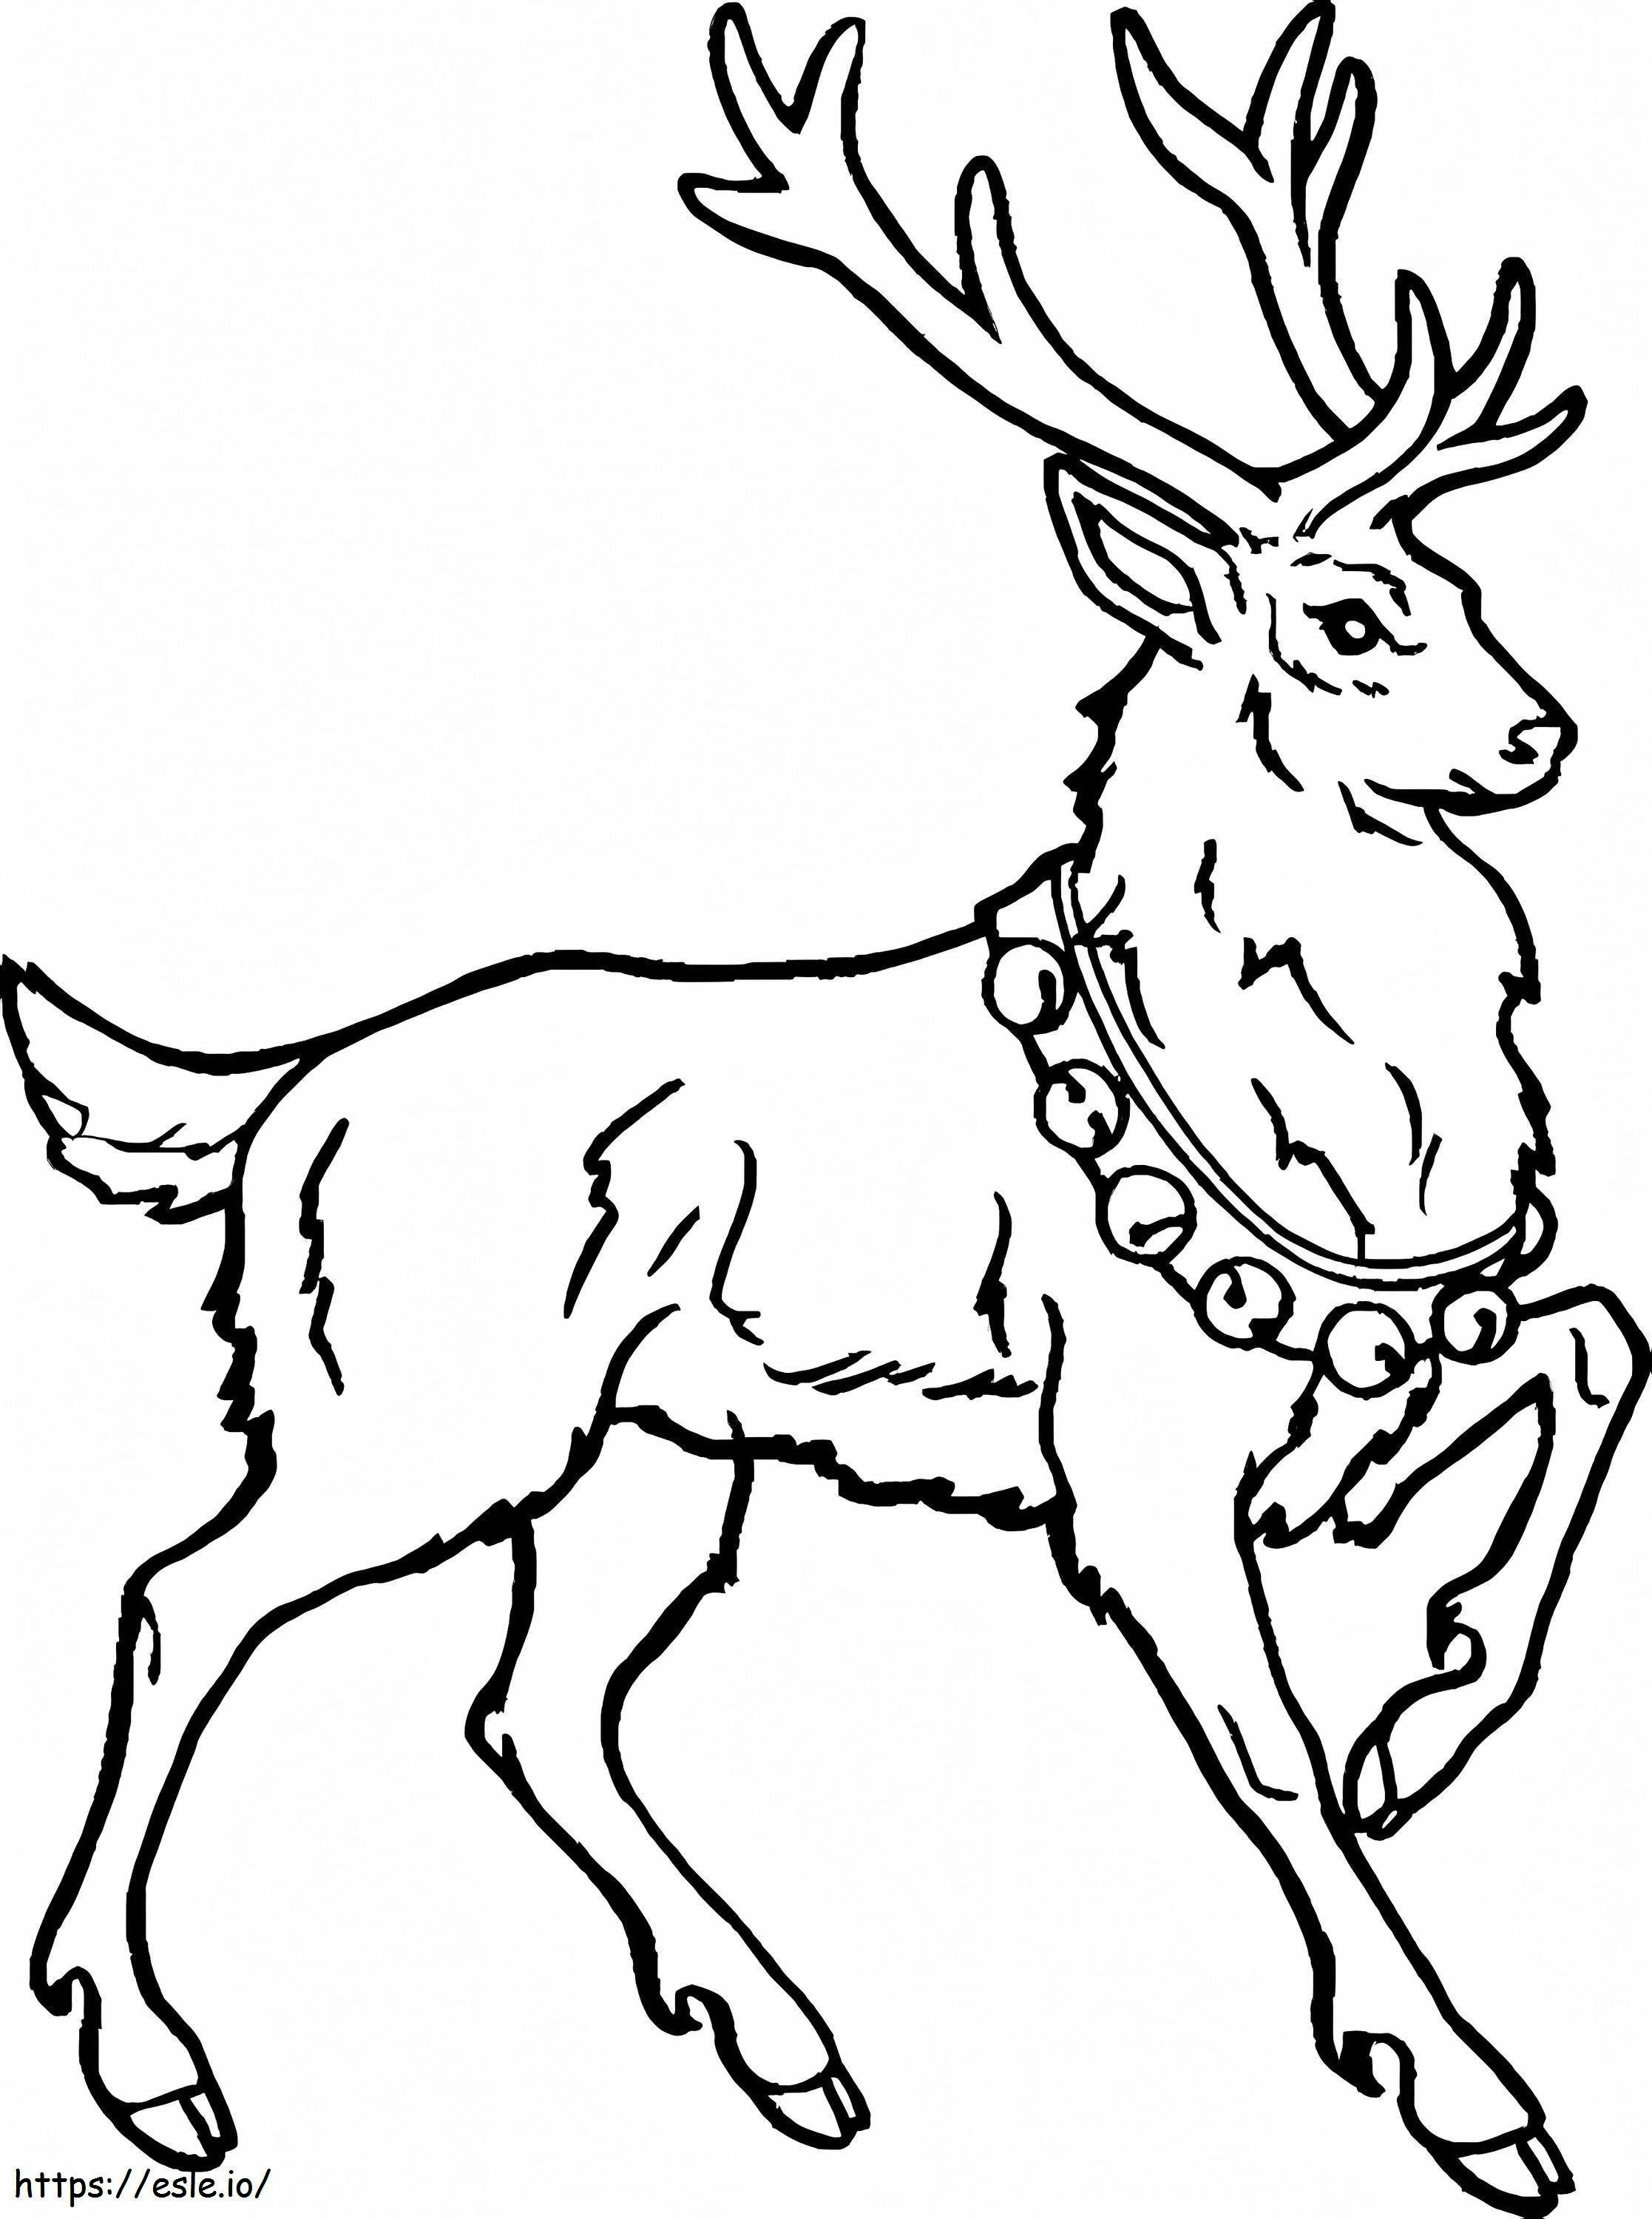 Awesome Reindeer coloring page